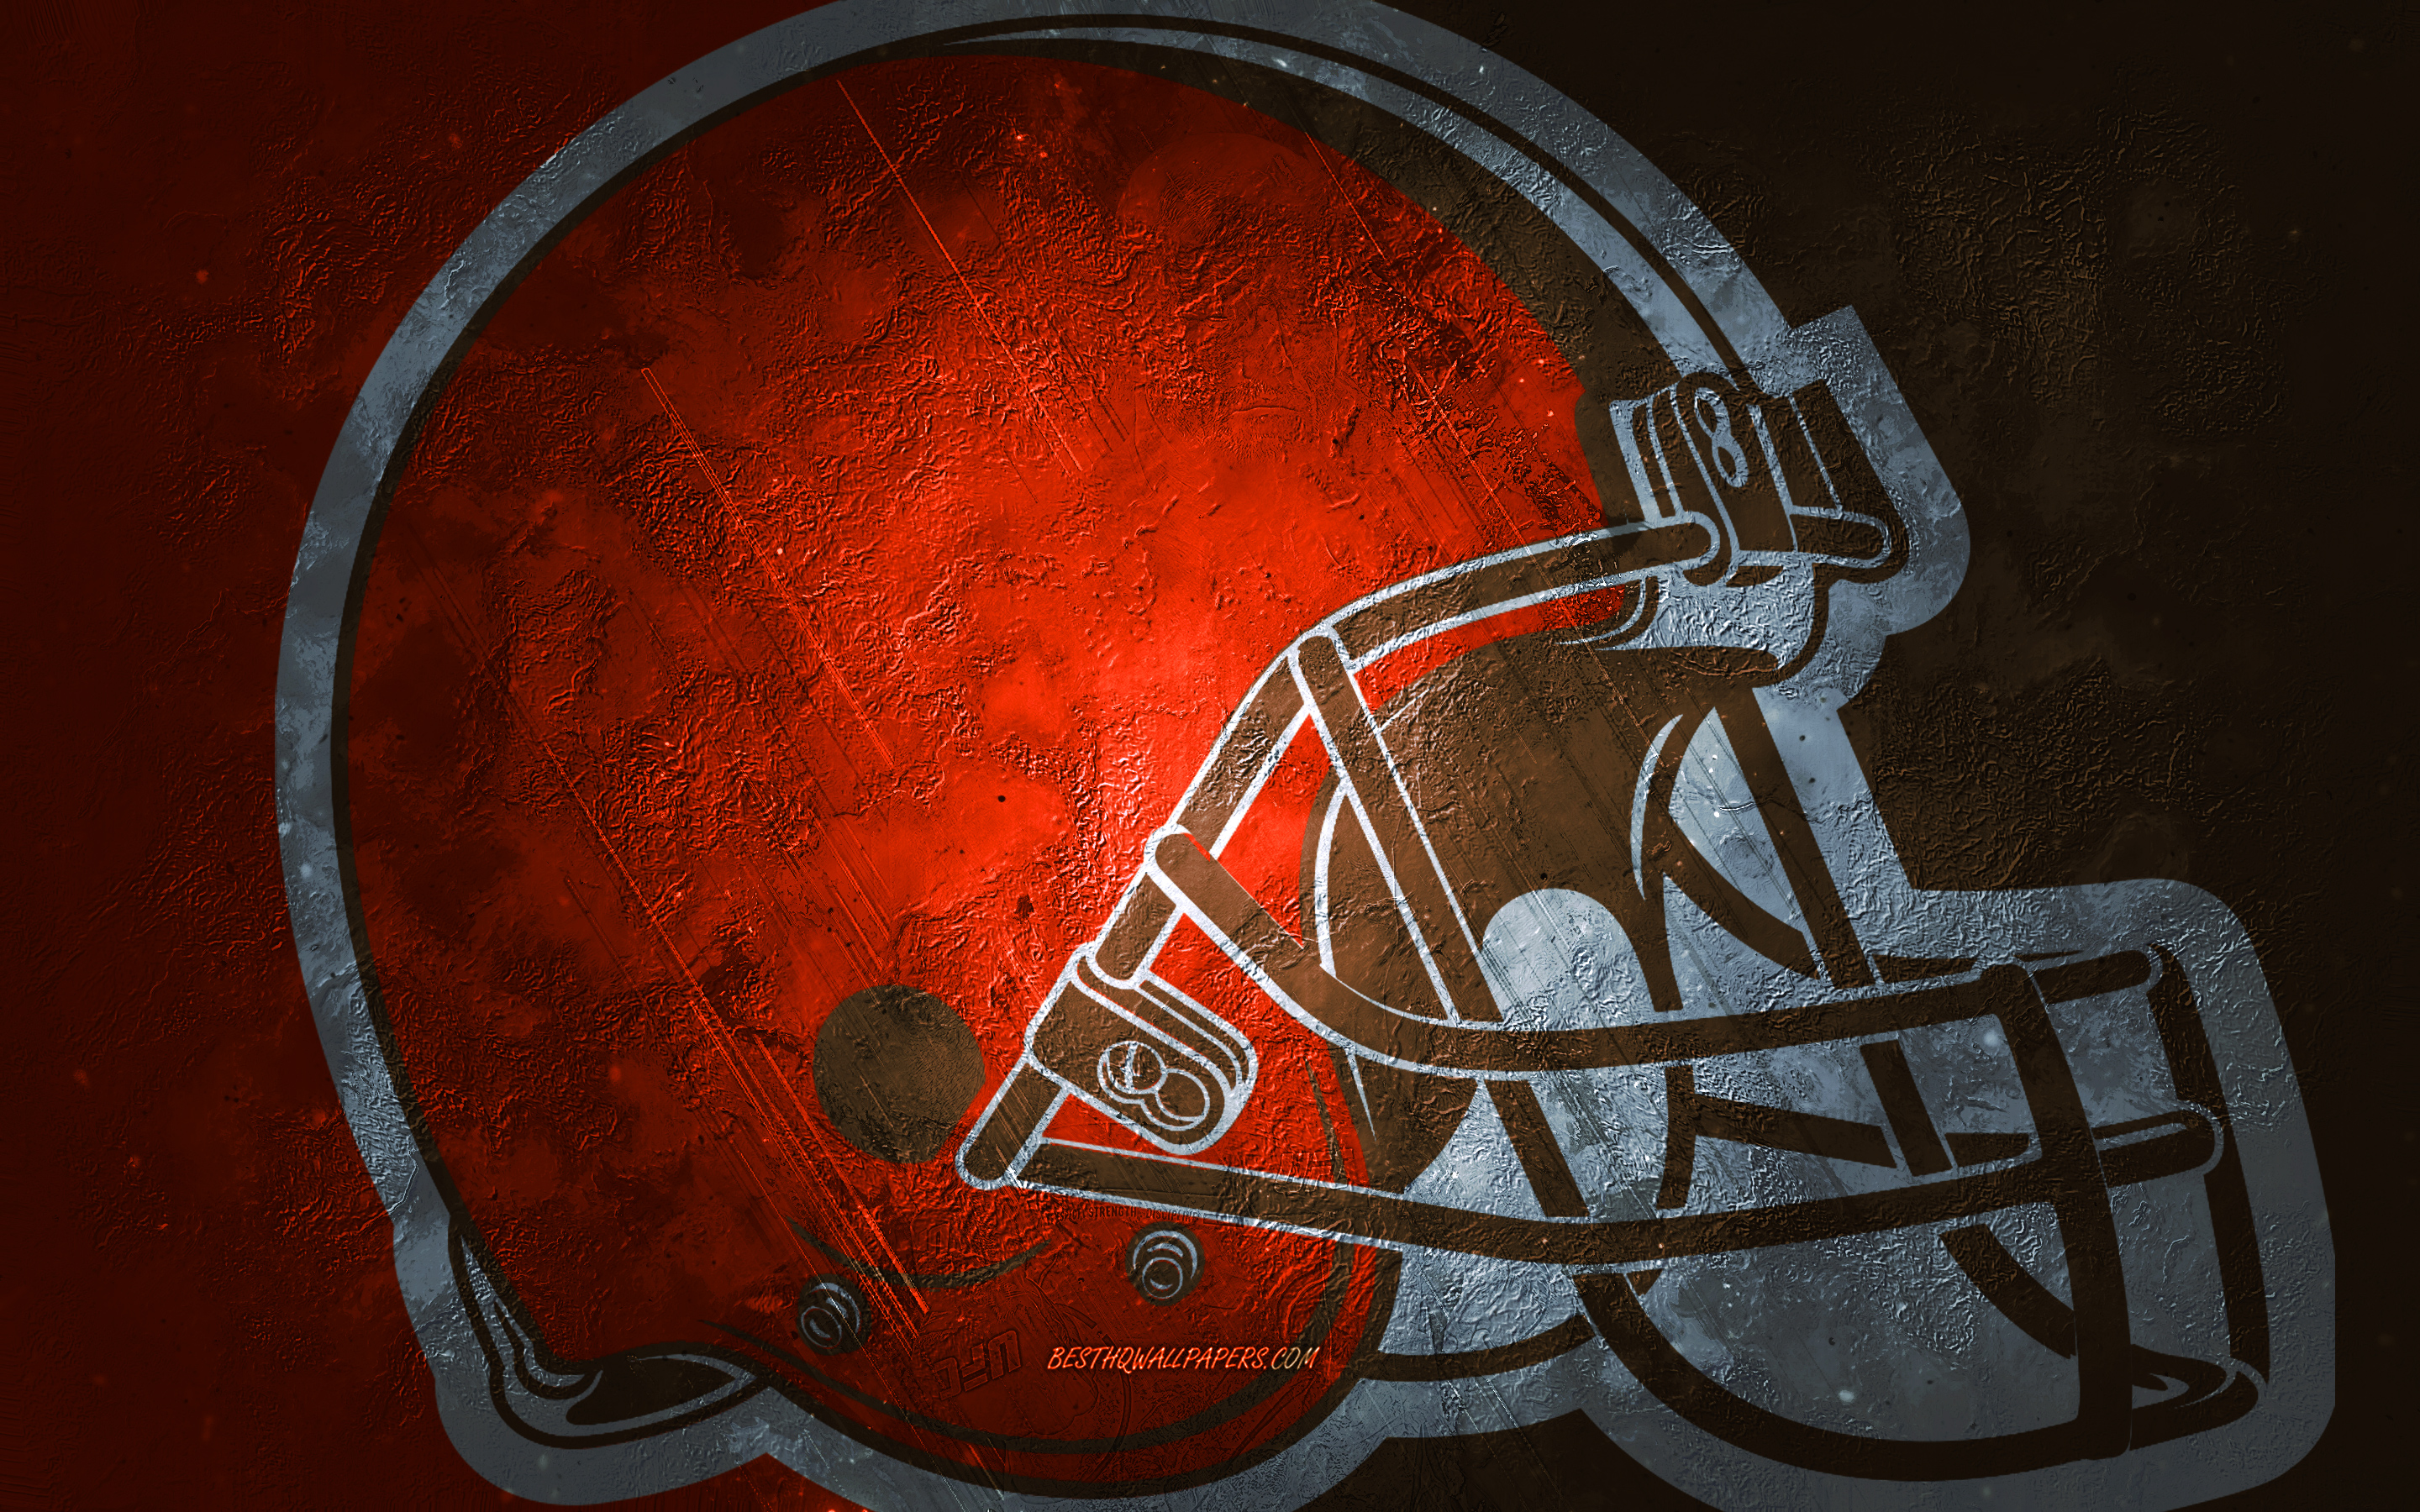 Download wallpapers cleveland browns american football team orange stone background cleveland browns logo grunge art nfl american football usa cleveland browns emblem for desktop with resolution x high quality hd pictures wallpapers